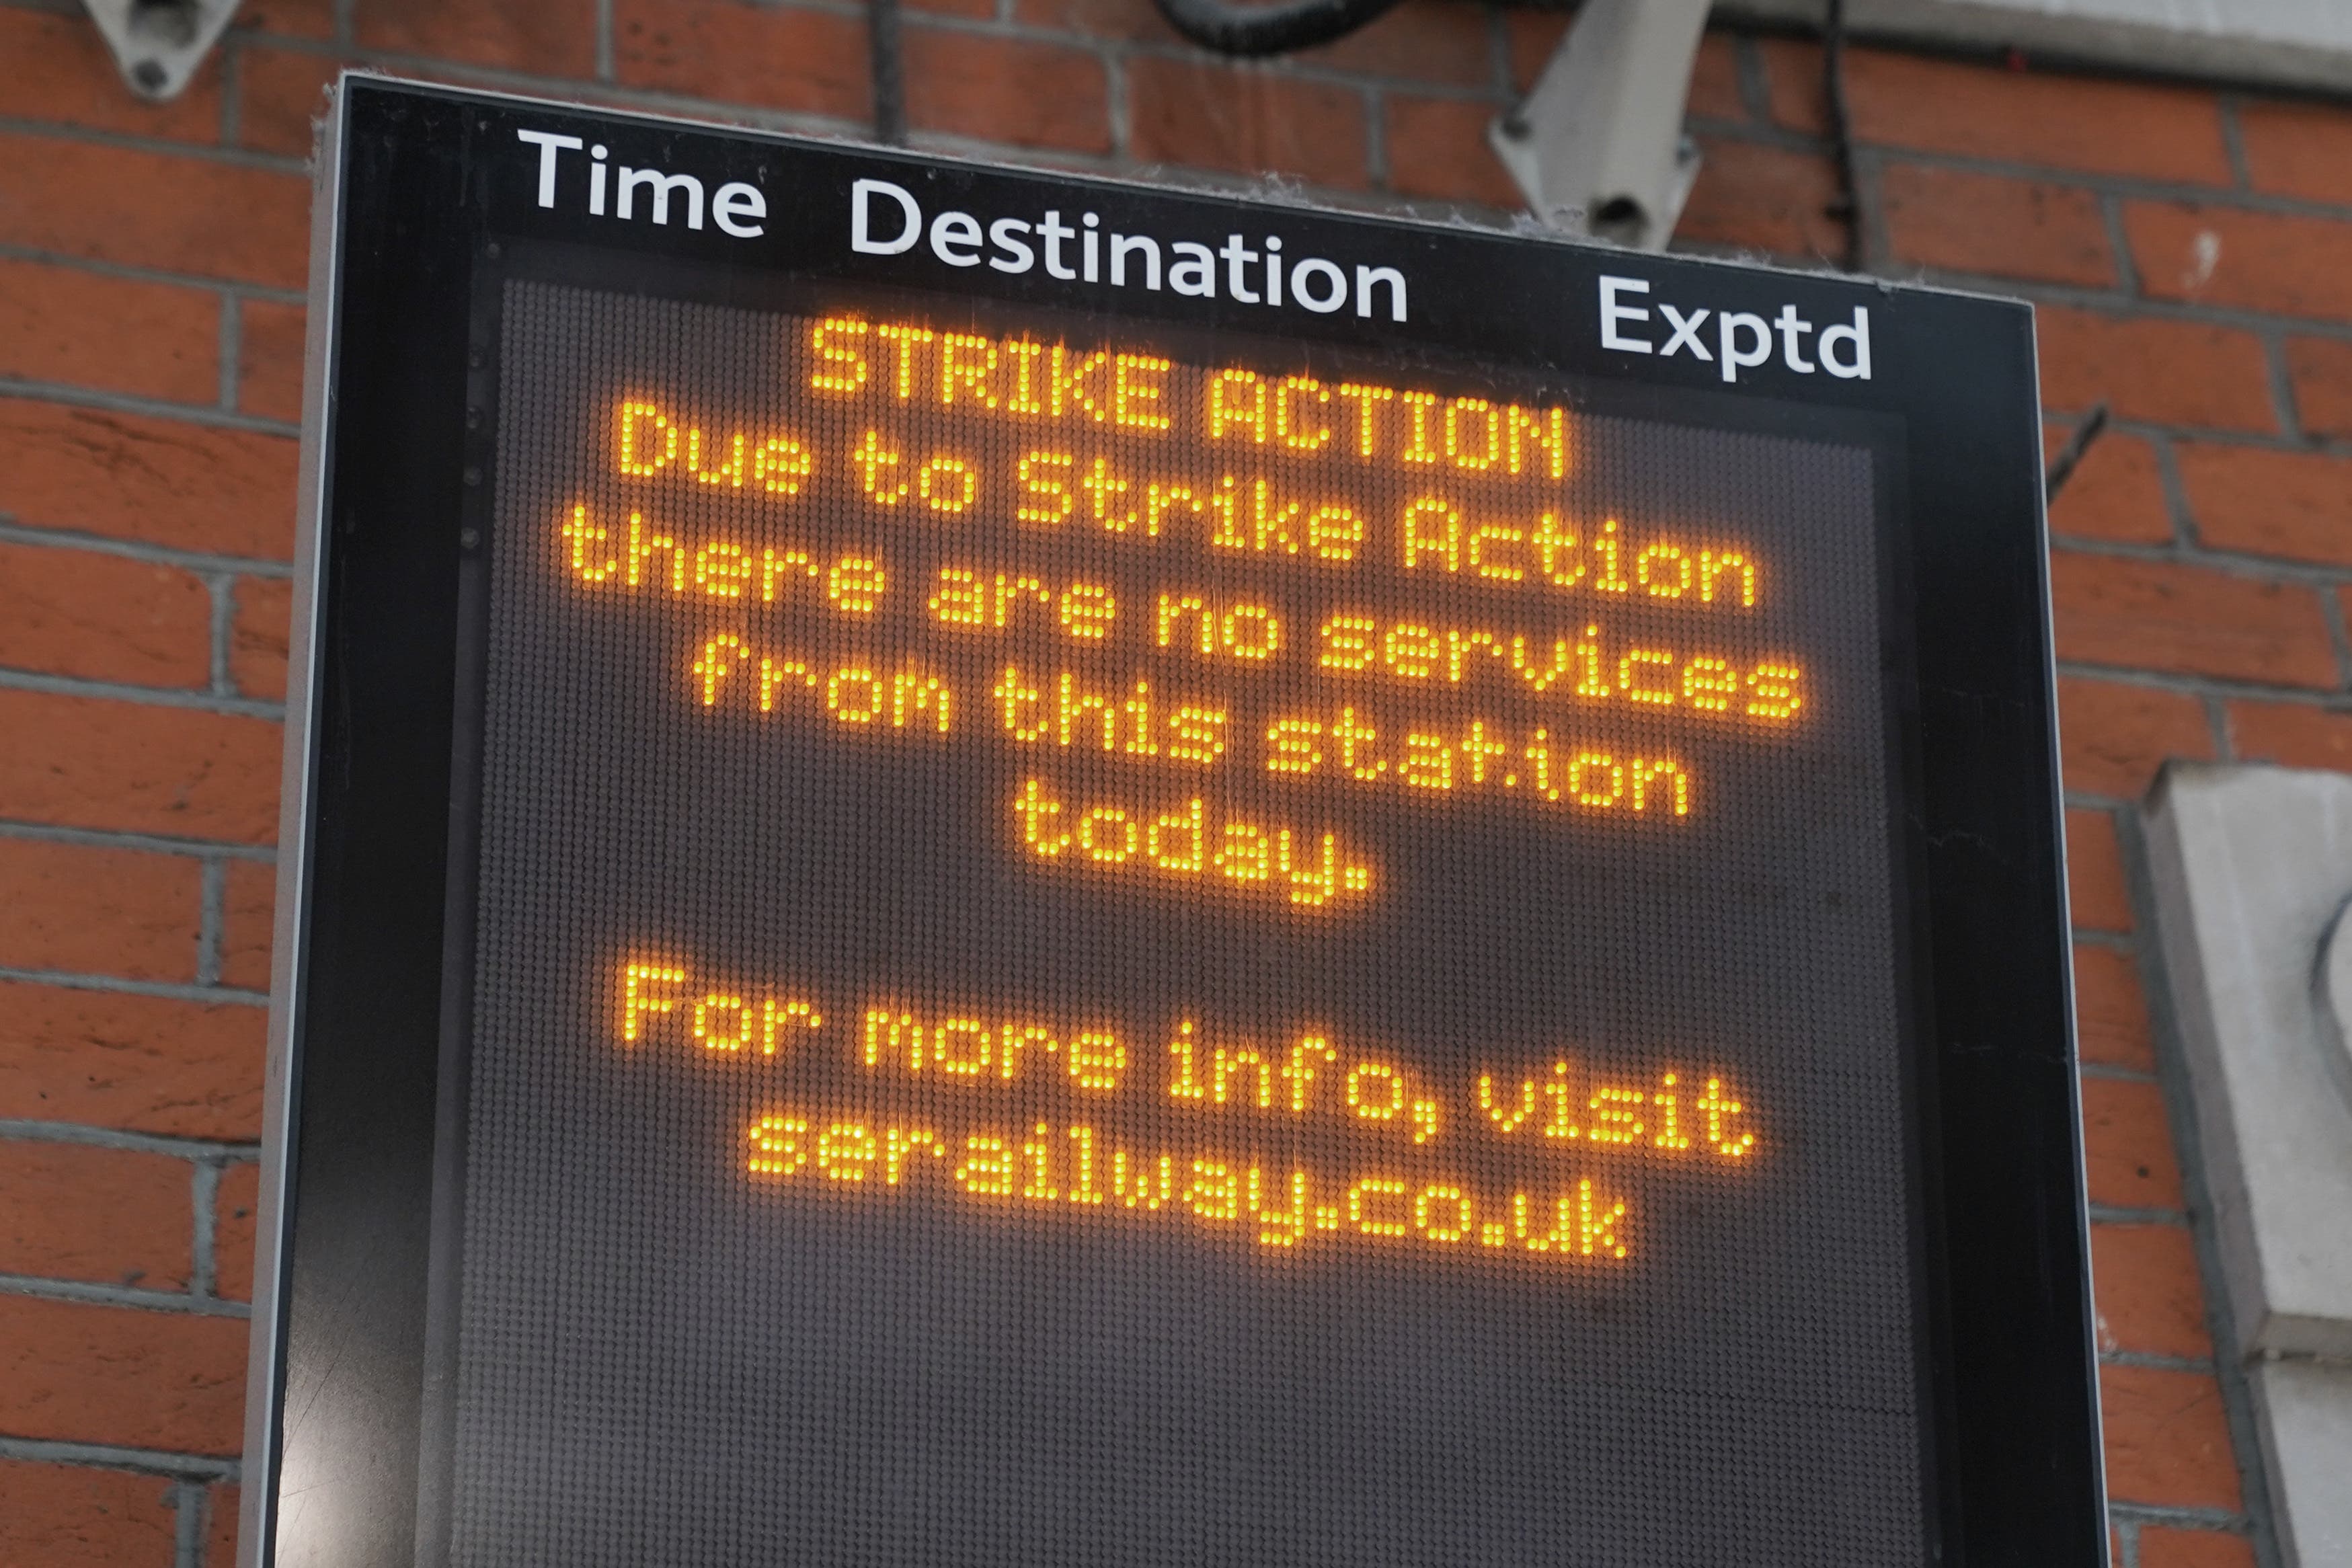 A departures board at Waterloo train station